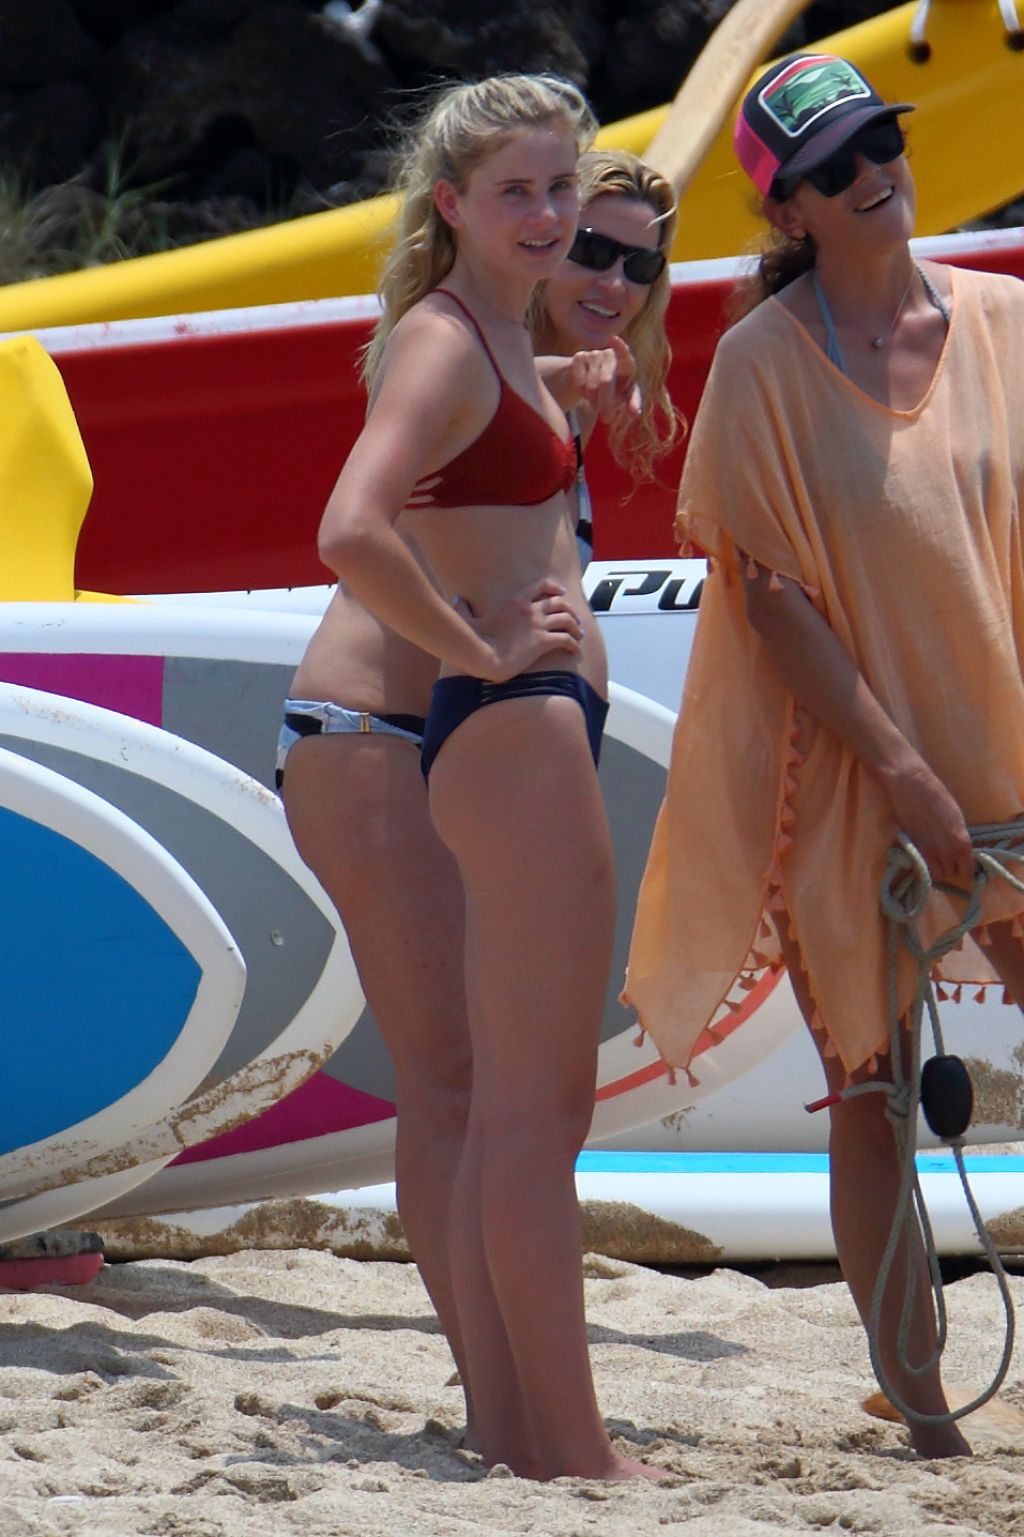 Mason Grammer and Mom Camille Grammer in Their Bikinis on the Beach in Hawa...